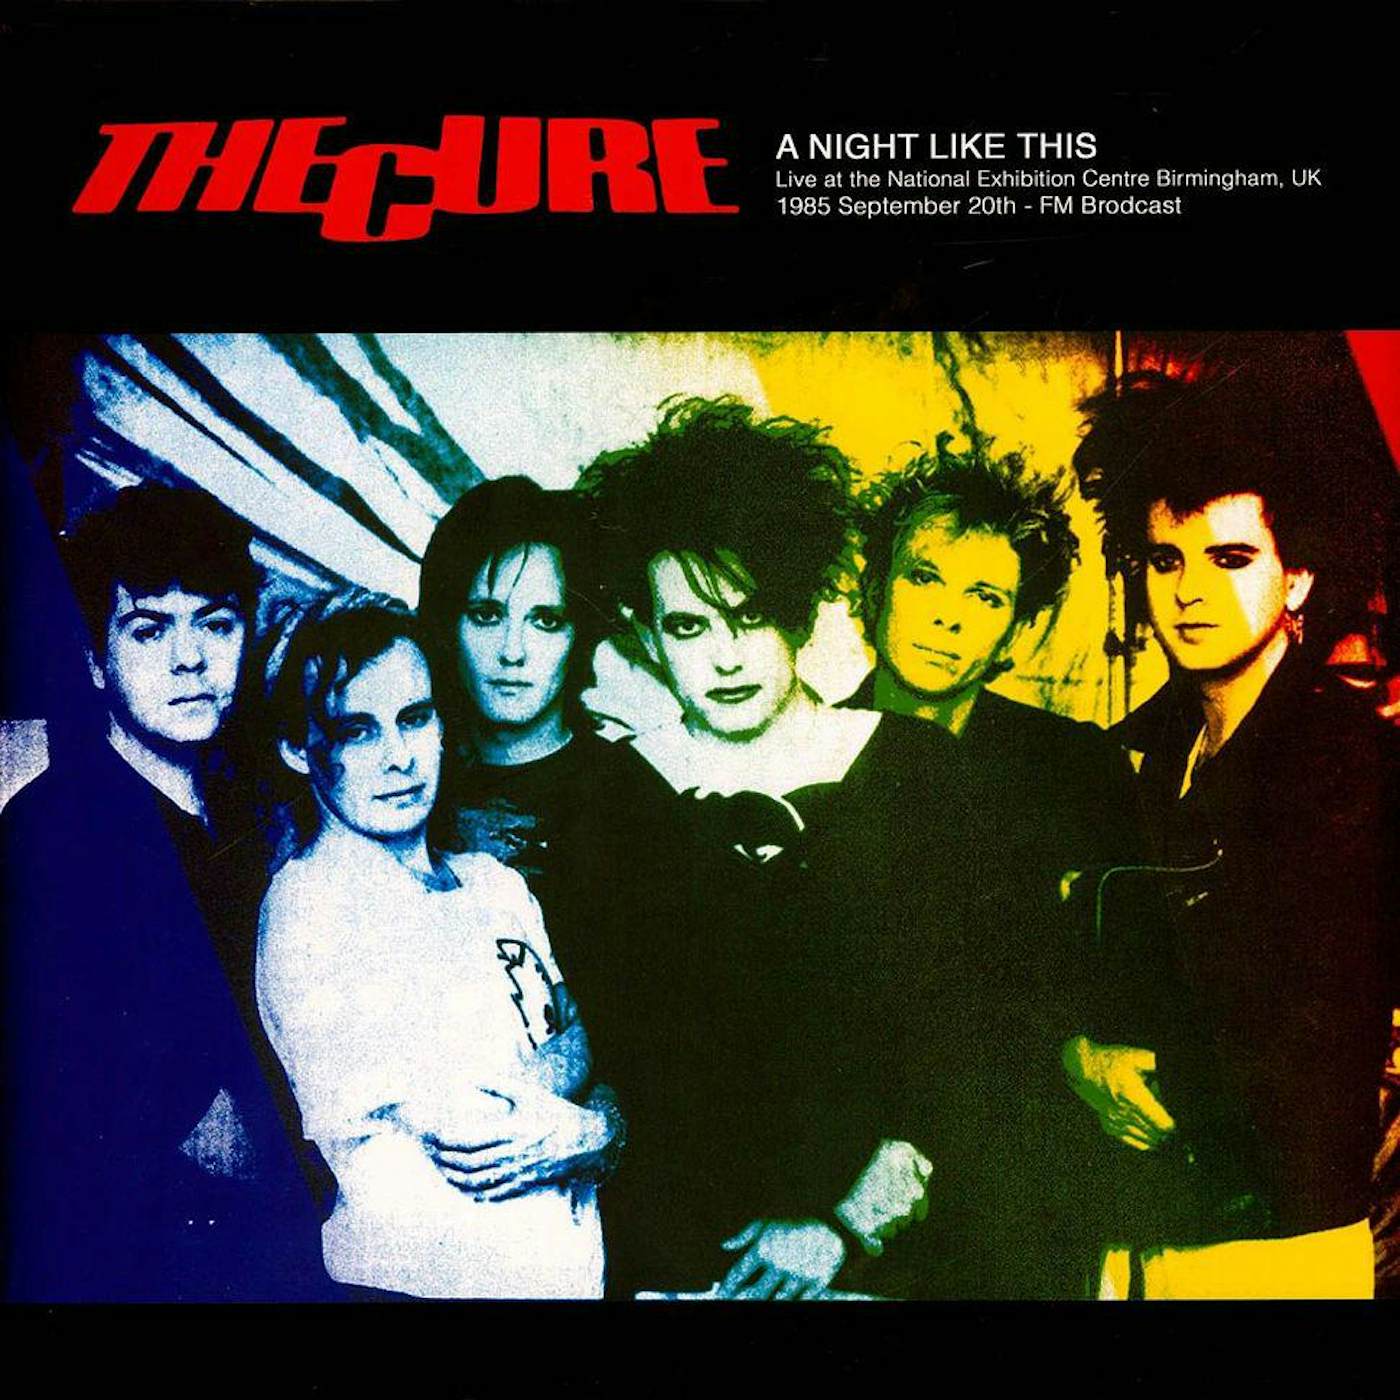 The Cure Night Like This: Live At National Exhibition Centre Birmingham, Uk 1985 Sept 20th-fm (White) Vinyl Record